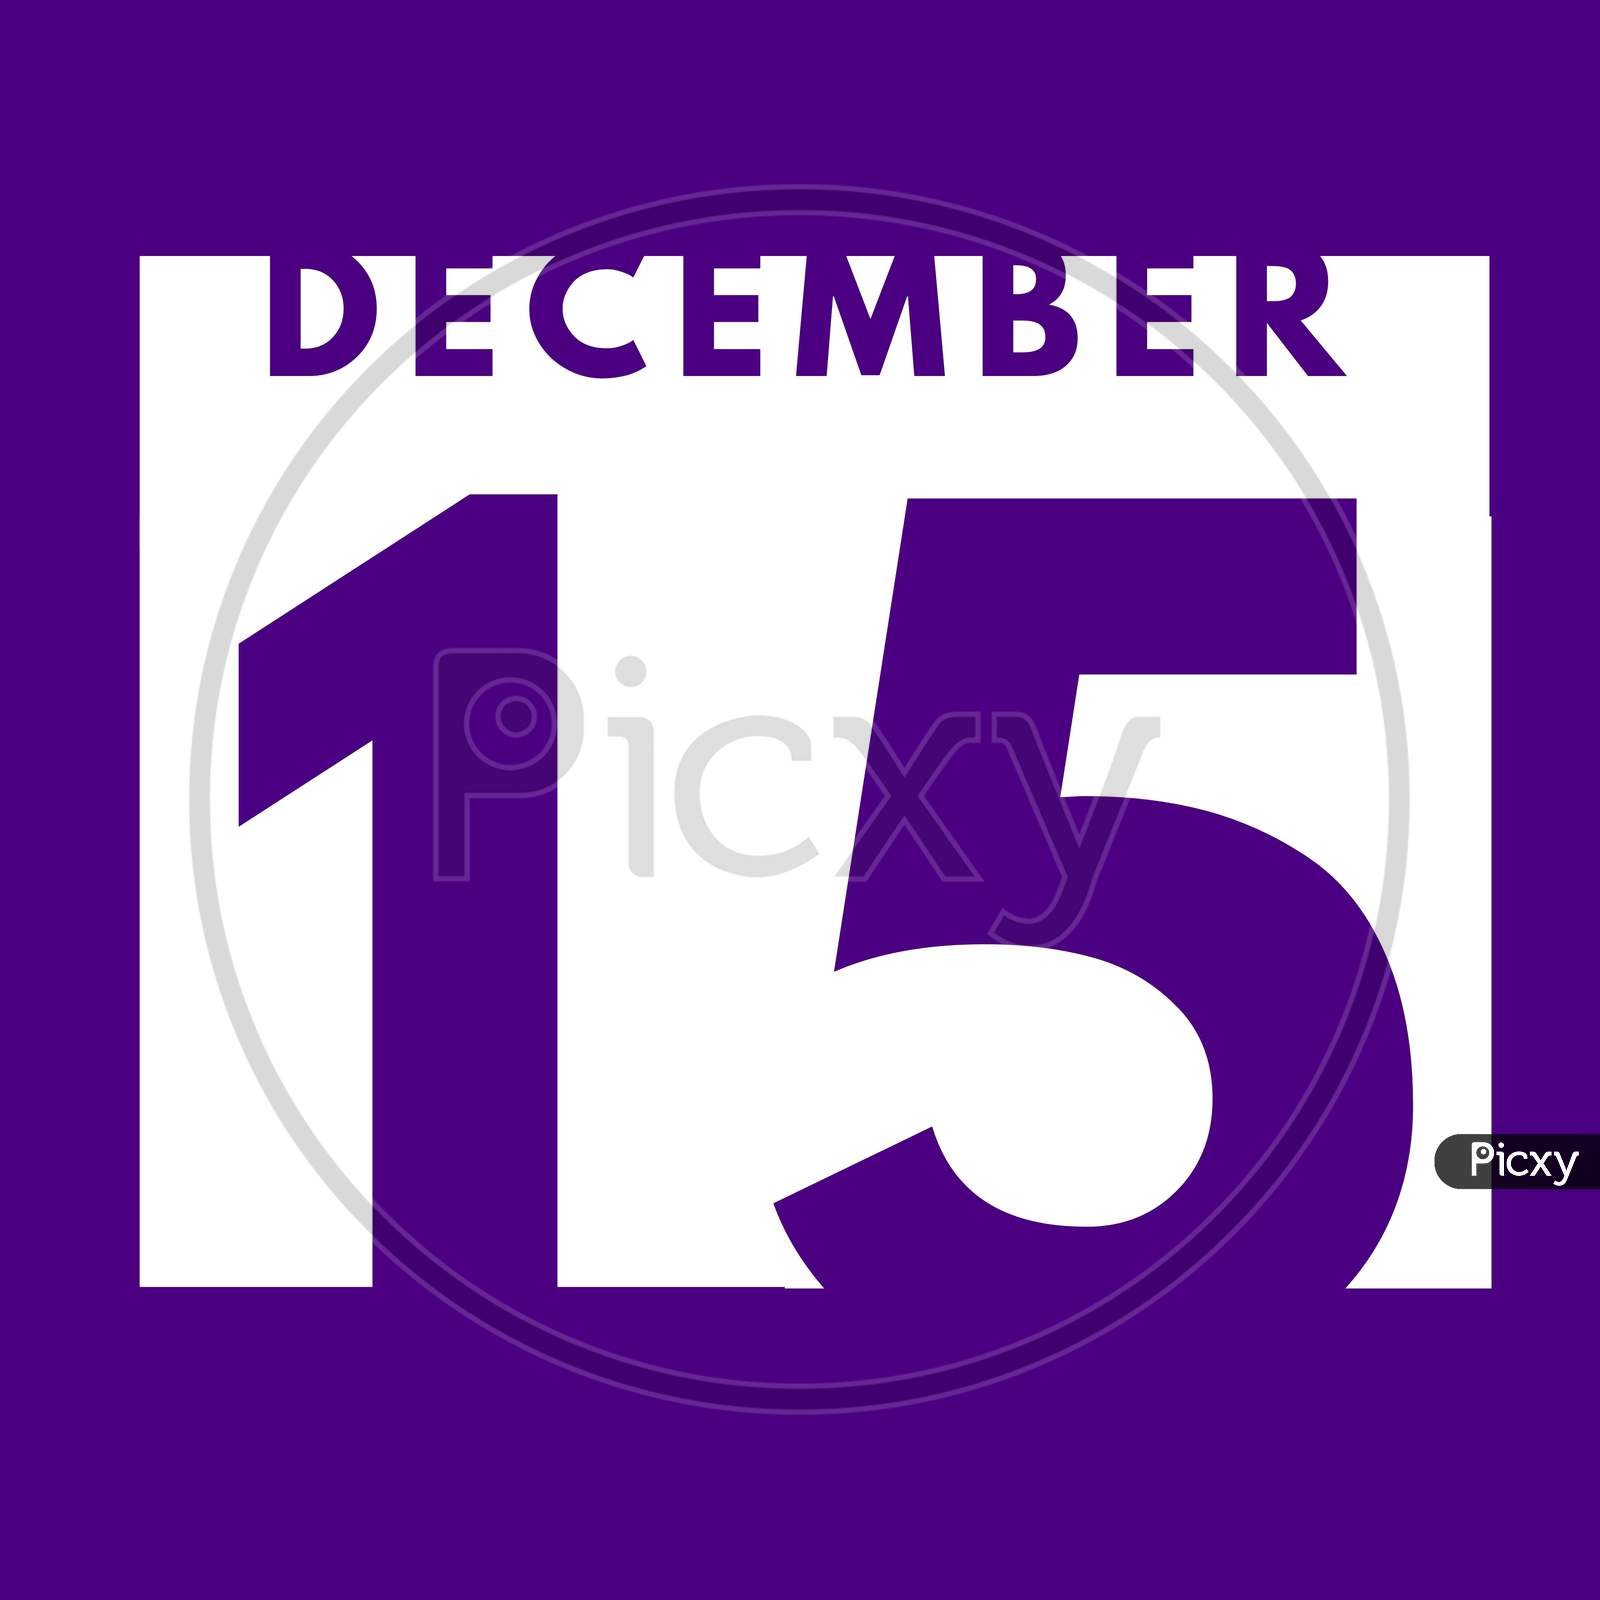 December 15 . Flat Modern Daily Calendar Icon .Date ,Day, Month .Calendar For The Month Of December